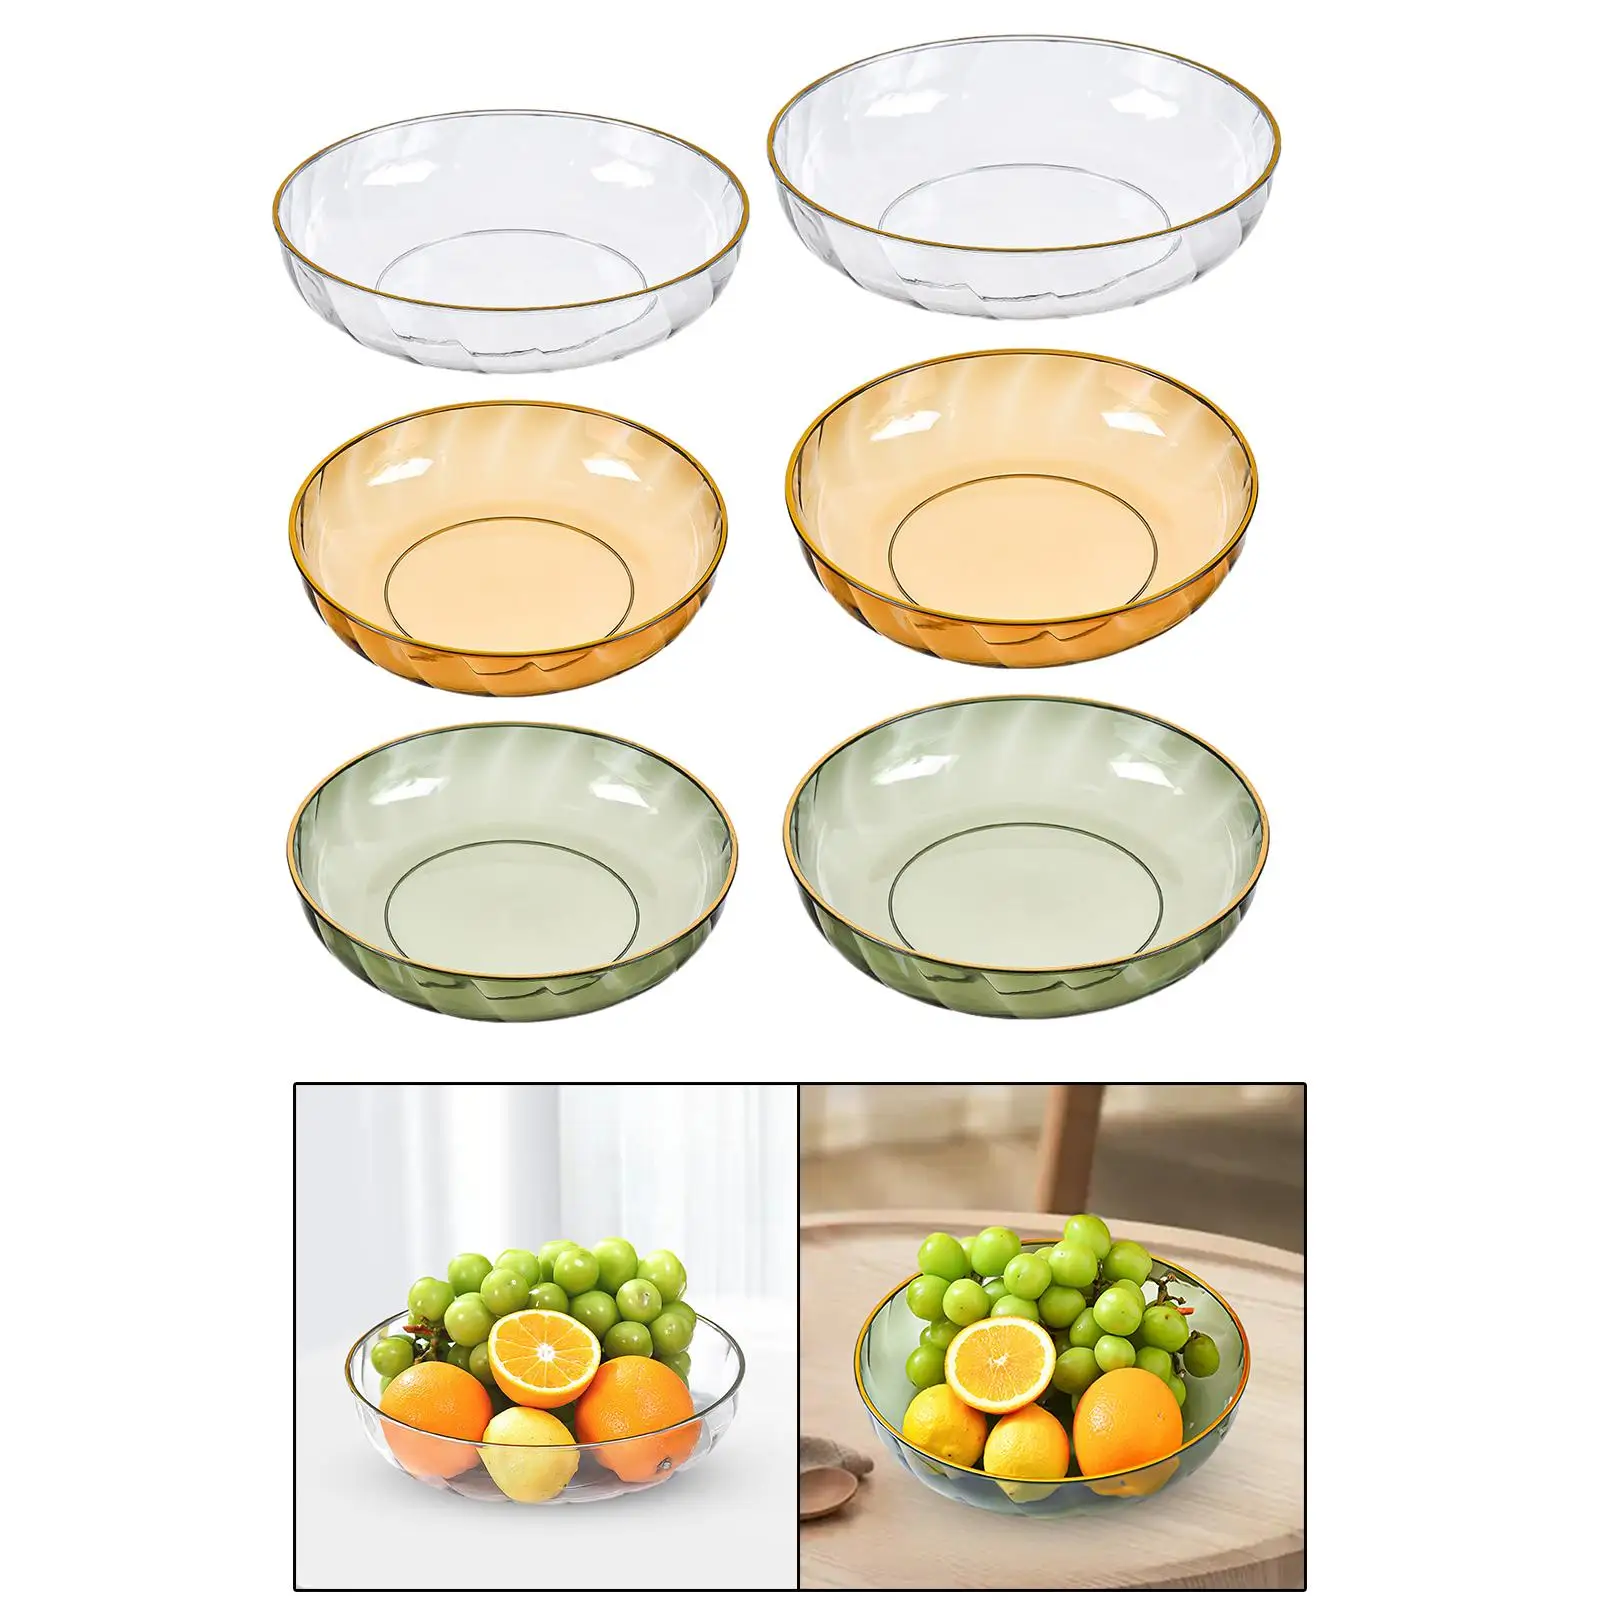 Serving Dish Round Storage Tray Bread Dish Plates Dried Fruit Plate for Countertops Home Table Centerpiece Jewelry Makeup Decor